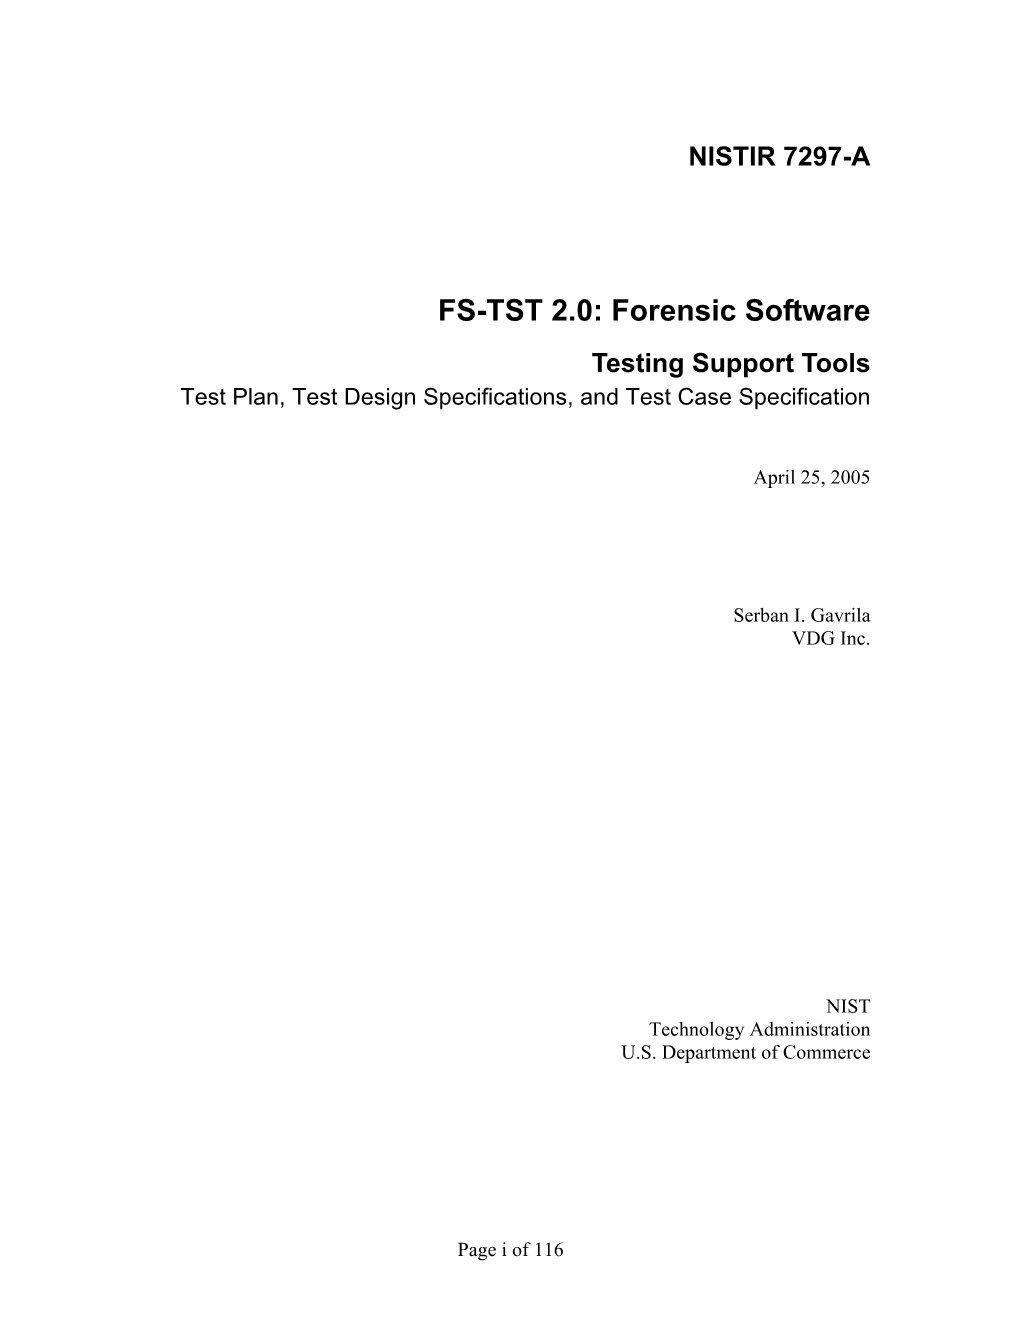 FS-TST 2.0: Forensic Software Testing Support Tools Test Plan, Test Design Specifications, and Test Case Specification